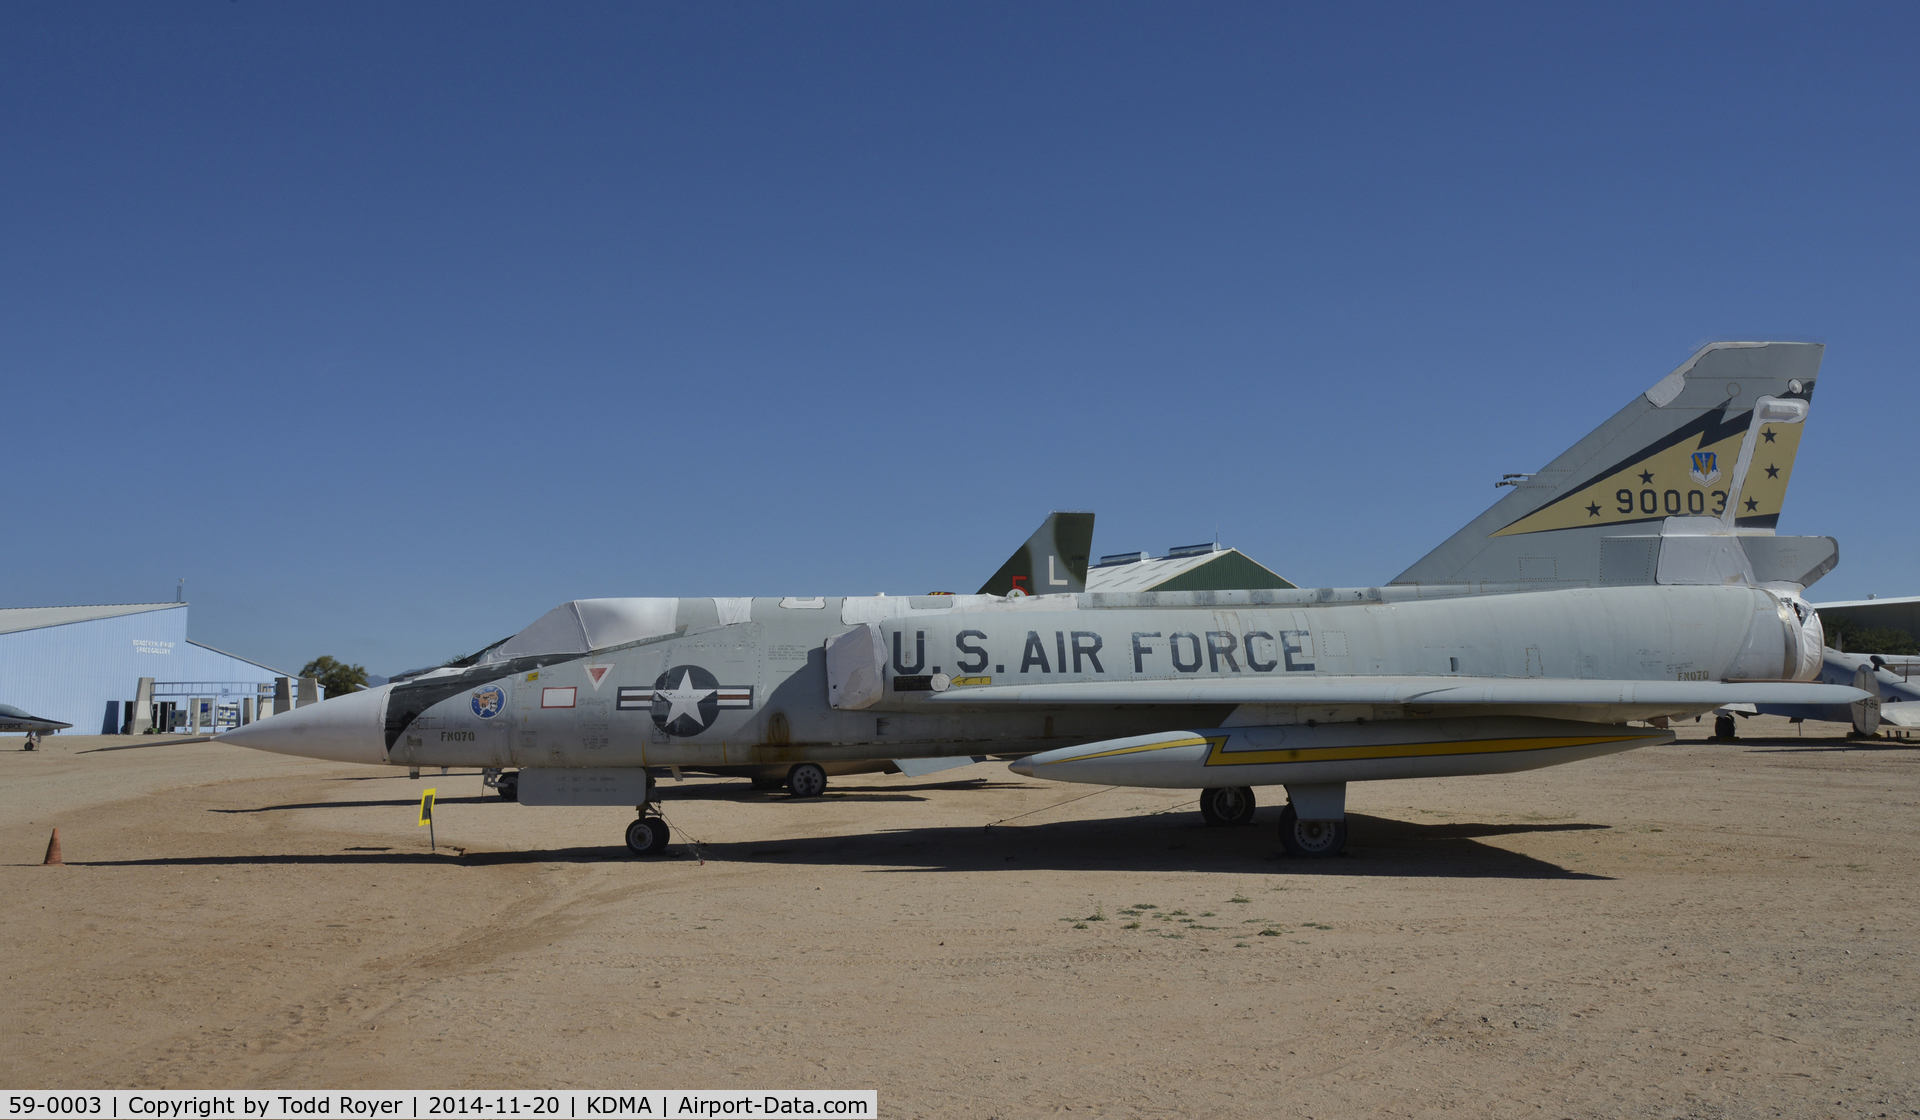 59-0003, 1959 Convair F-106A Delta Dart C/N 8-14-132, On display at the Pima Air and Space Museum